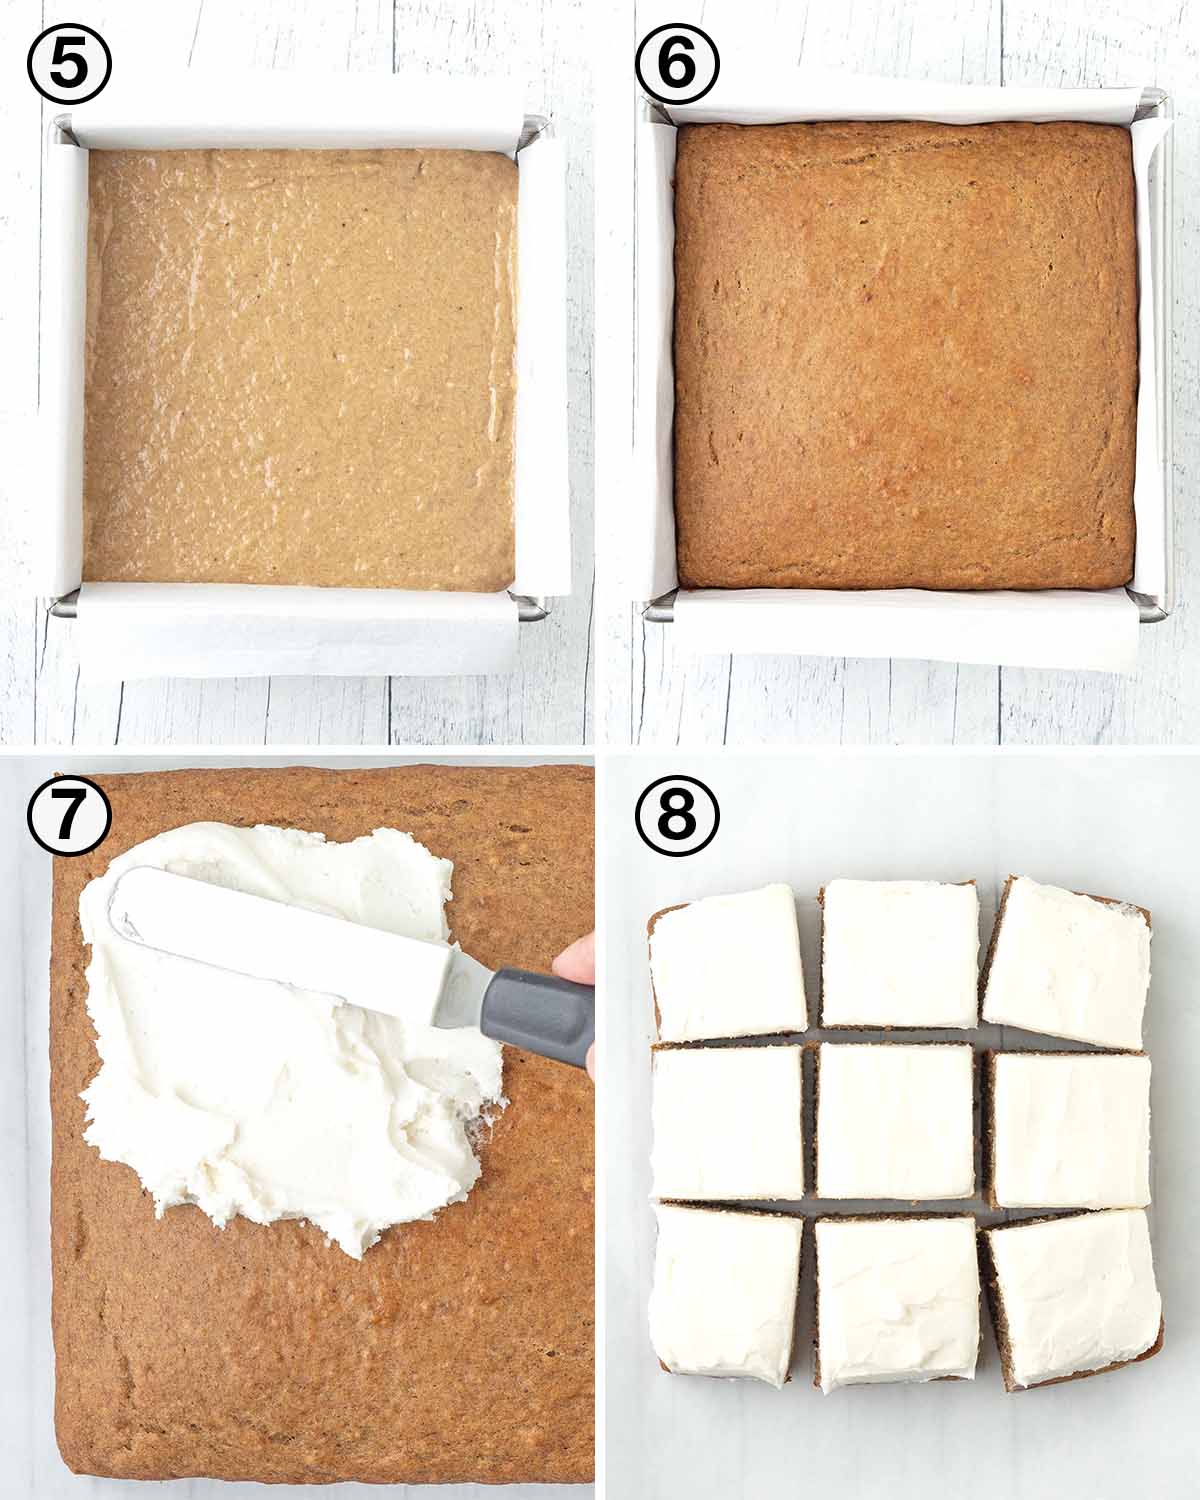 A collage of four images showing the second sequence of steps needed to make a vegan banana cake.